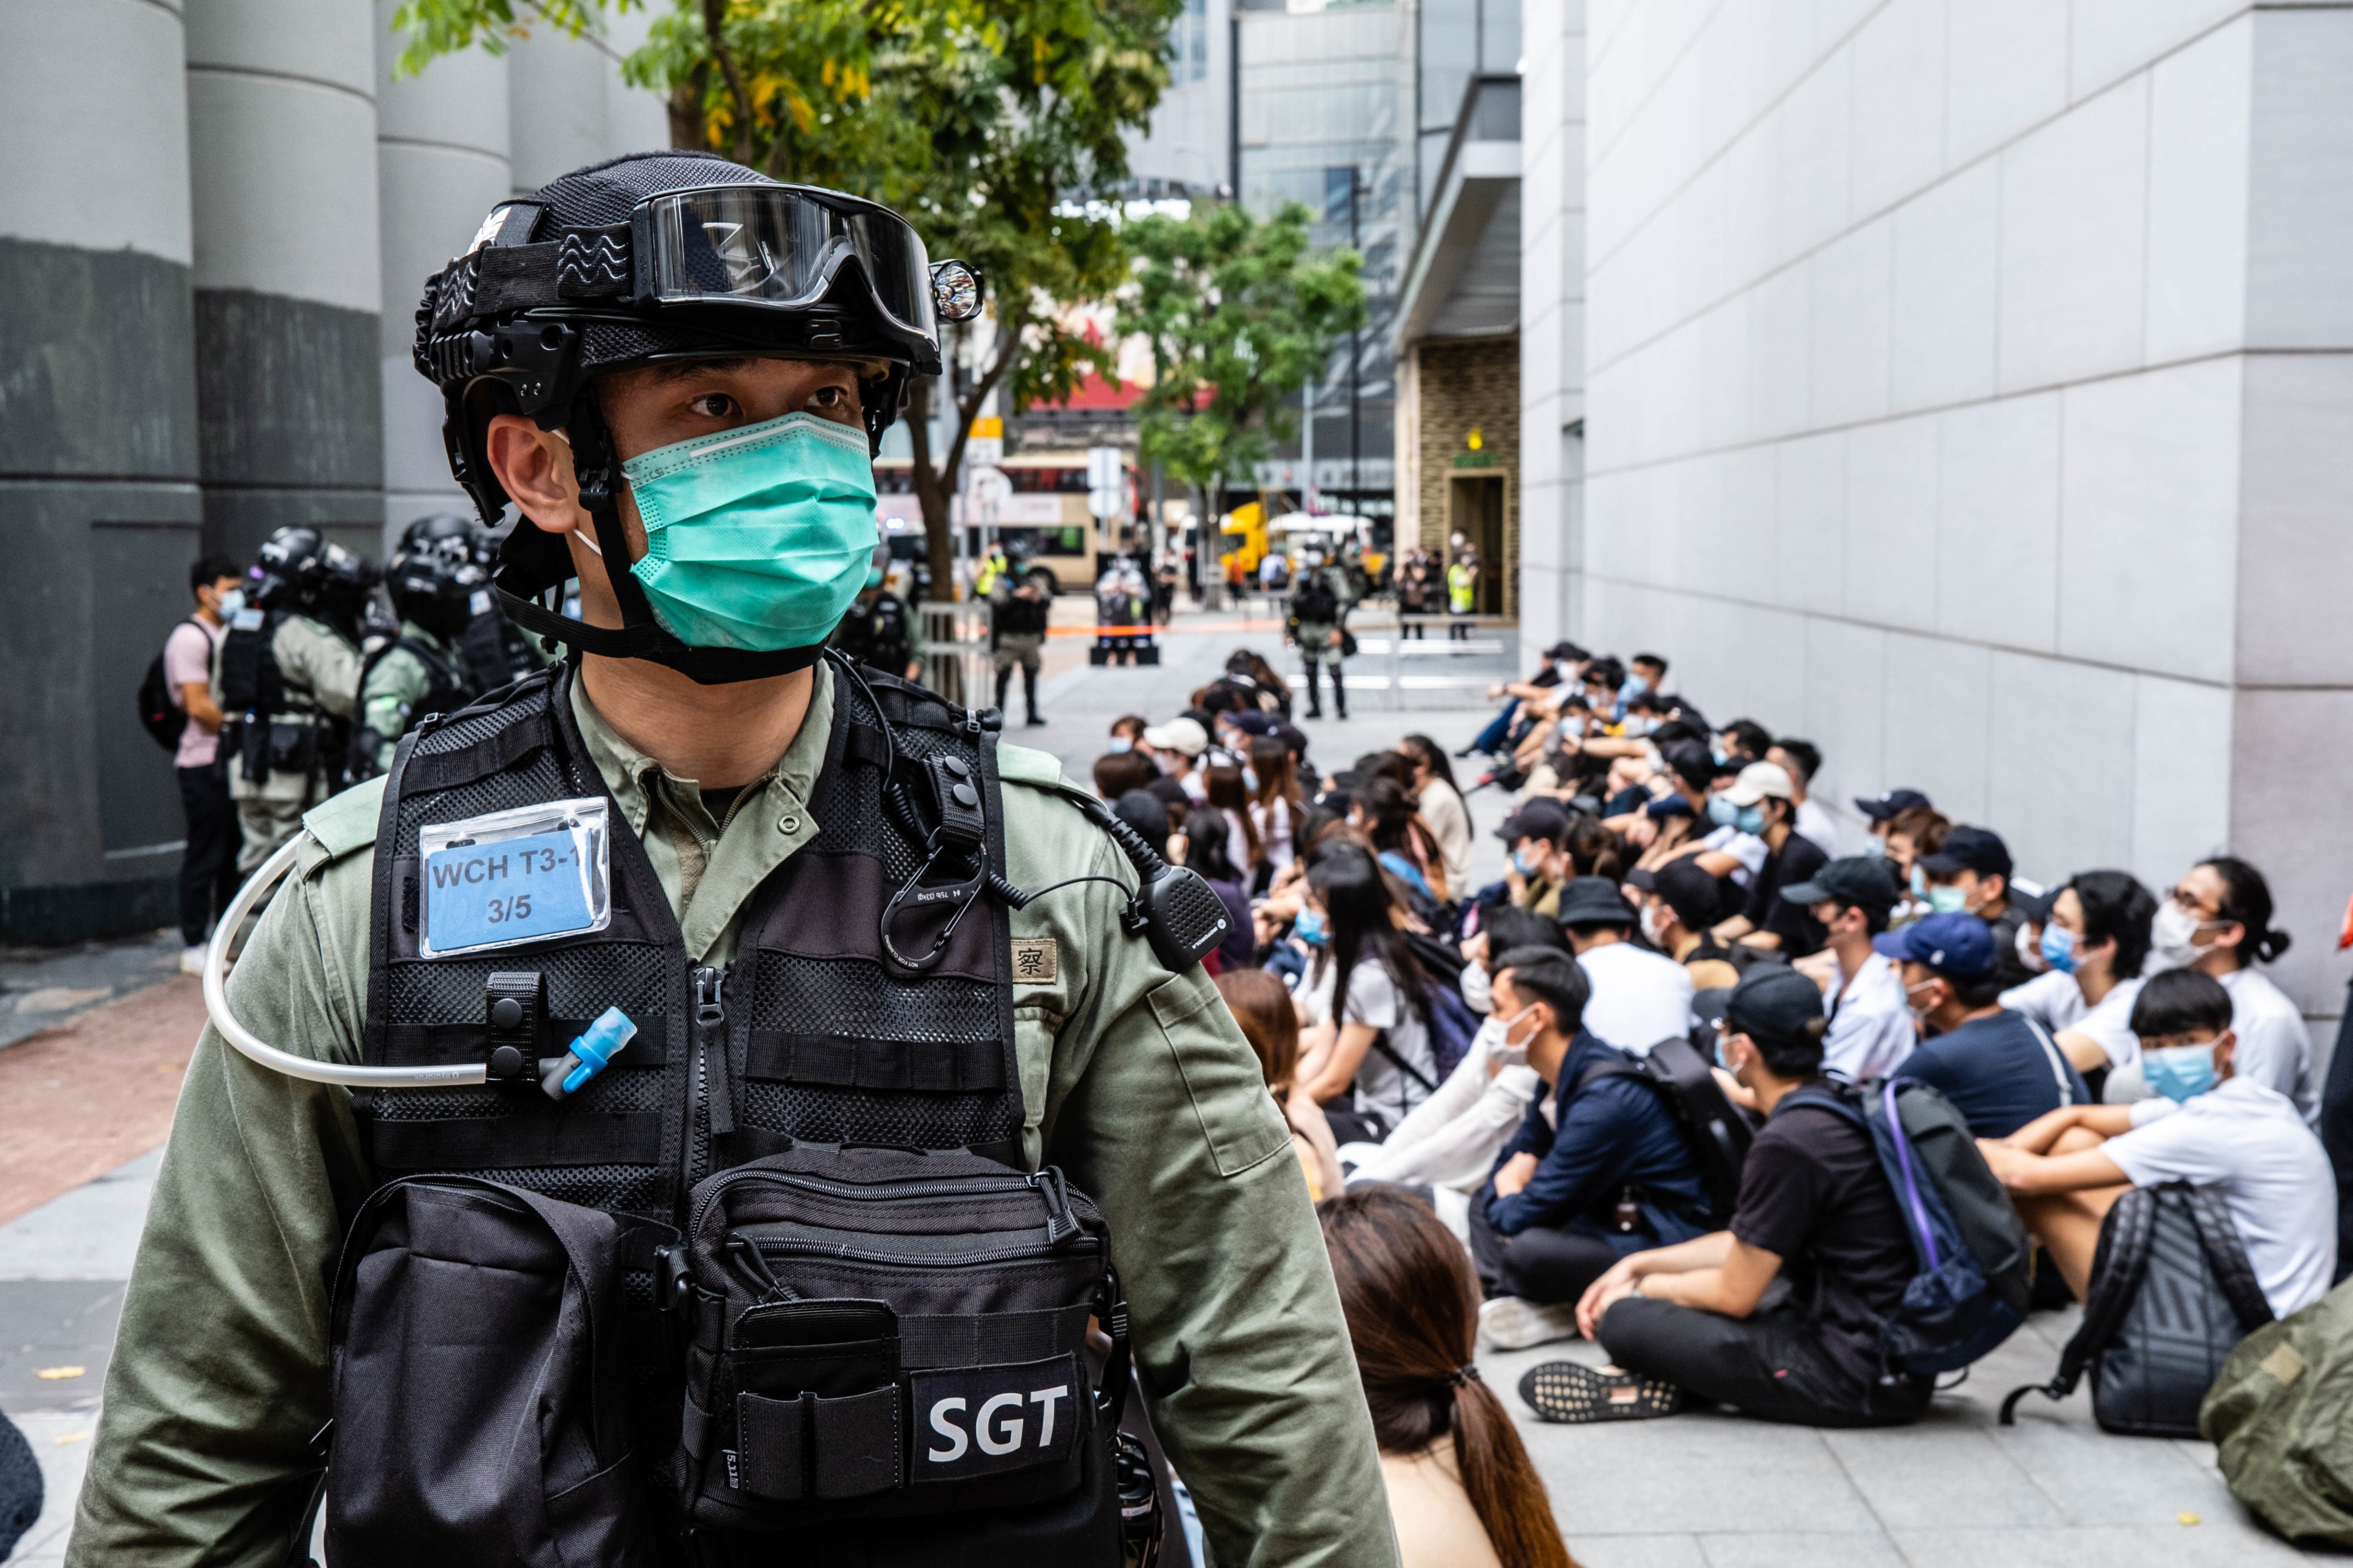 Riot police round up a group of protesters during the a demonstration against a law criminalizing insulting the Chinese national anthem, on May 27, 2020 in Hong Kong. (Willie Siau—SOPA Images/LightRocket/Getty Images)